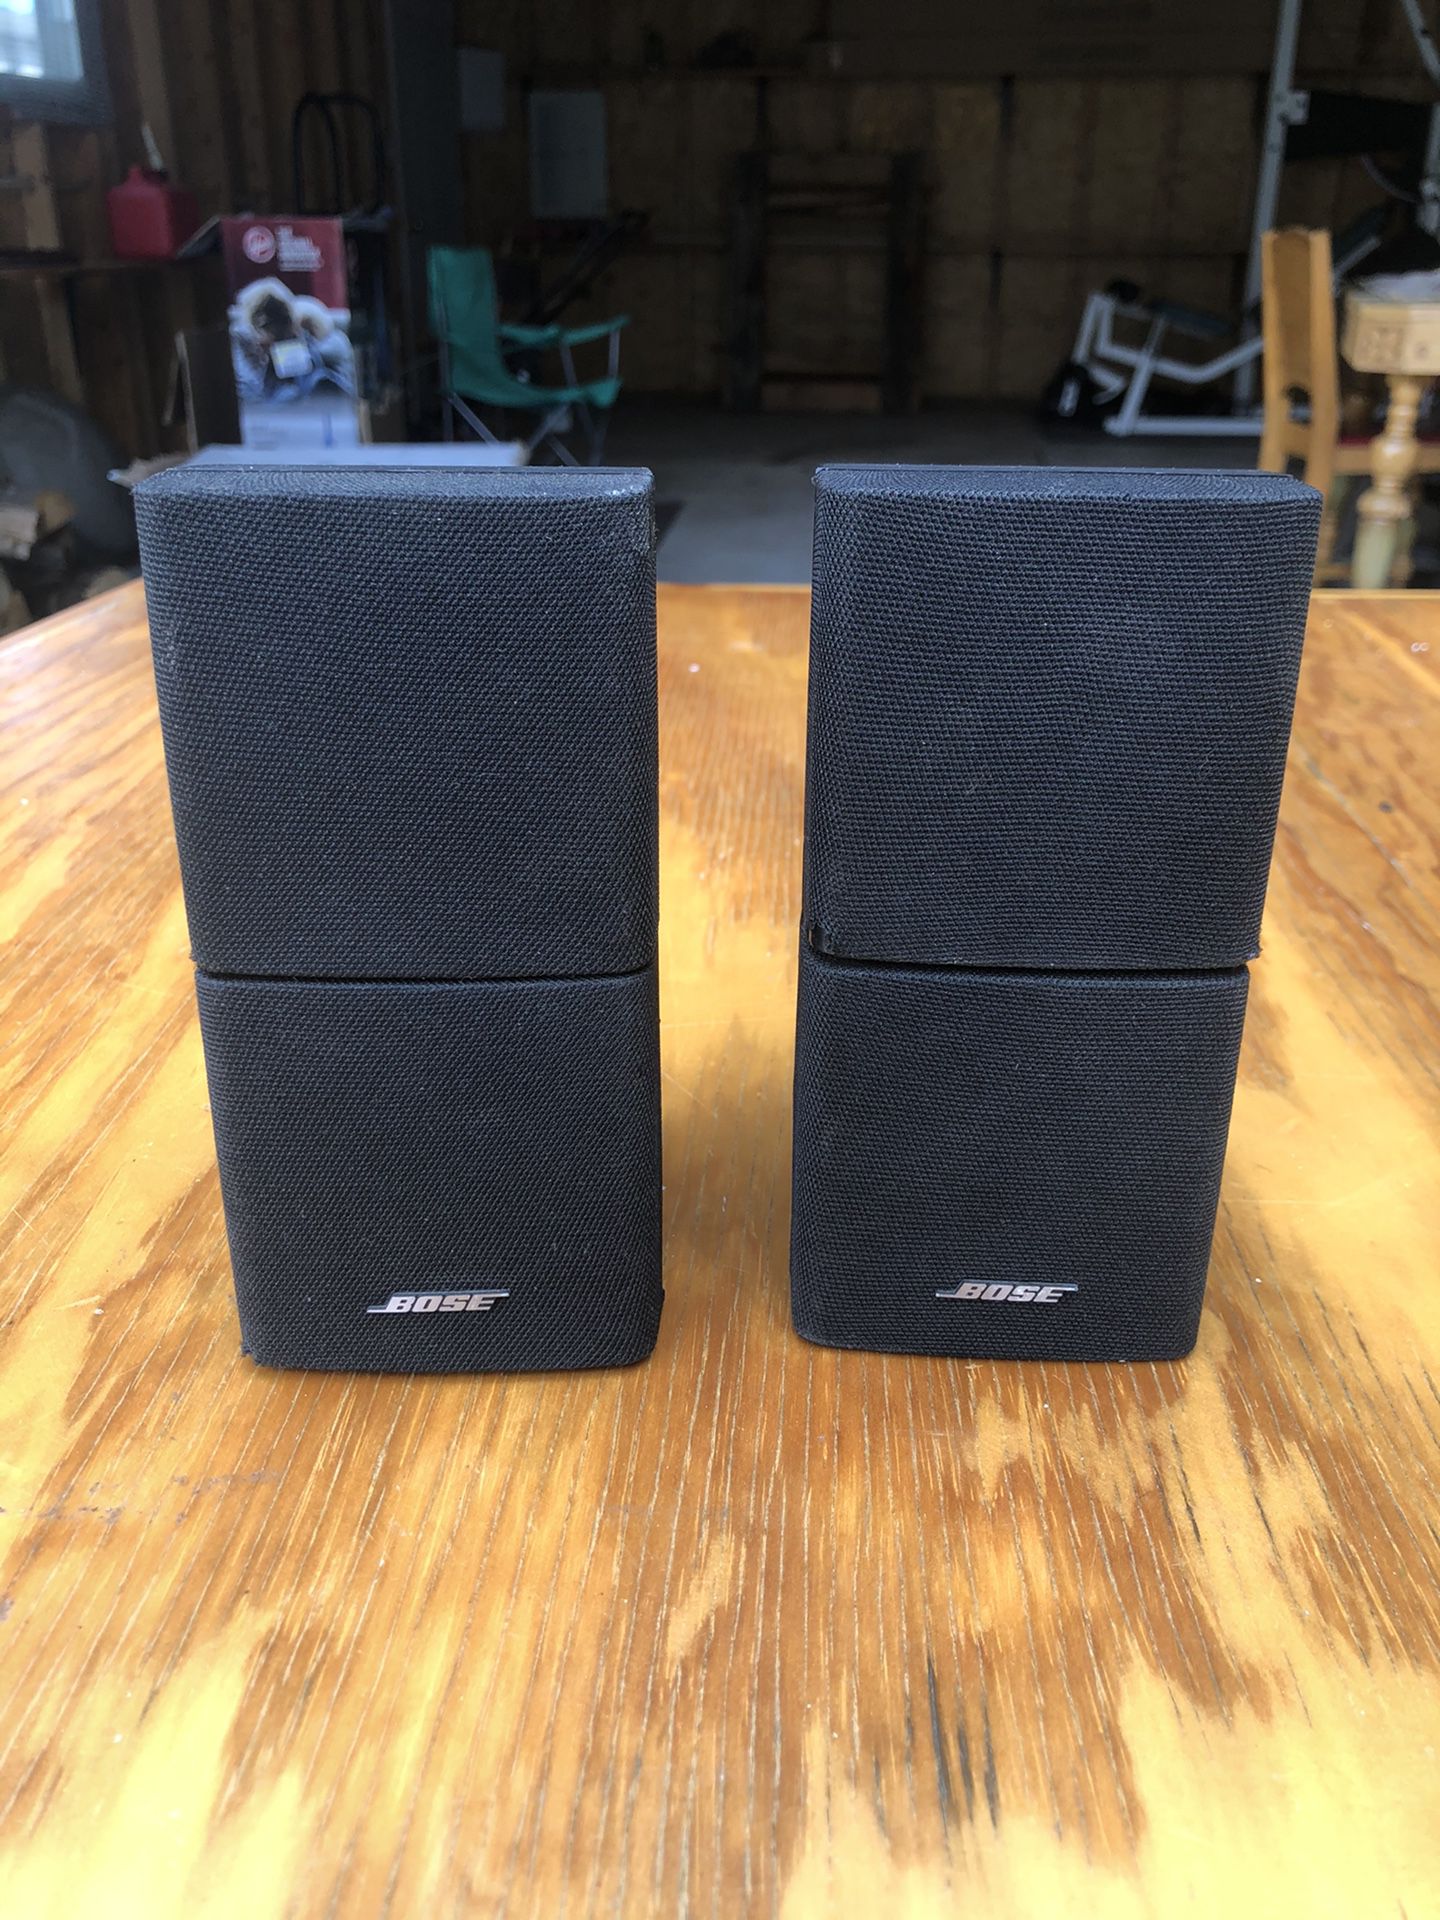 Very Nice Bose Double Cube Speakers